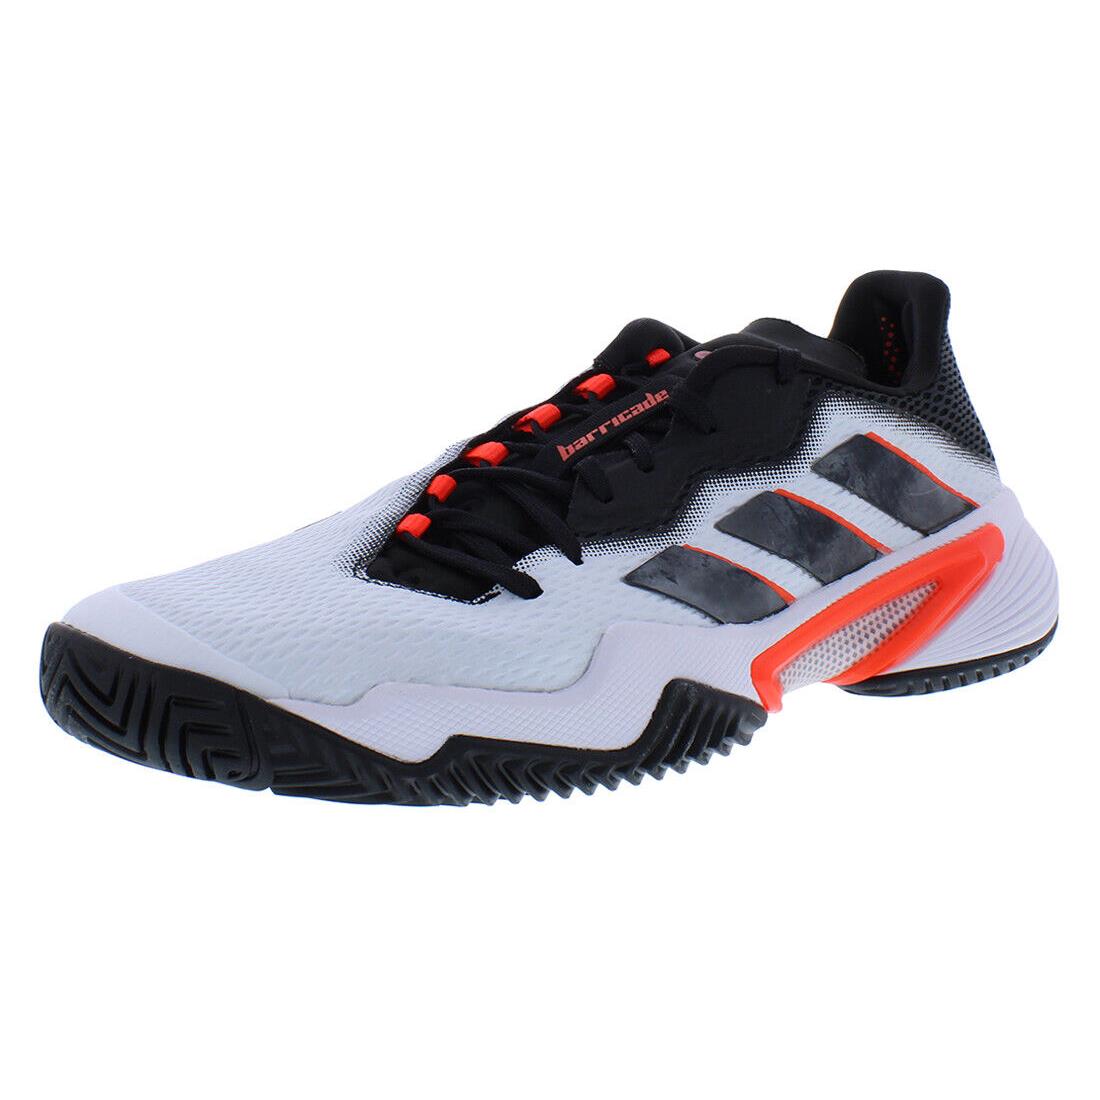 Adidas Barricade Mens Shoes Size 15 Color: Cloud White/core Black/solar Red